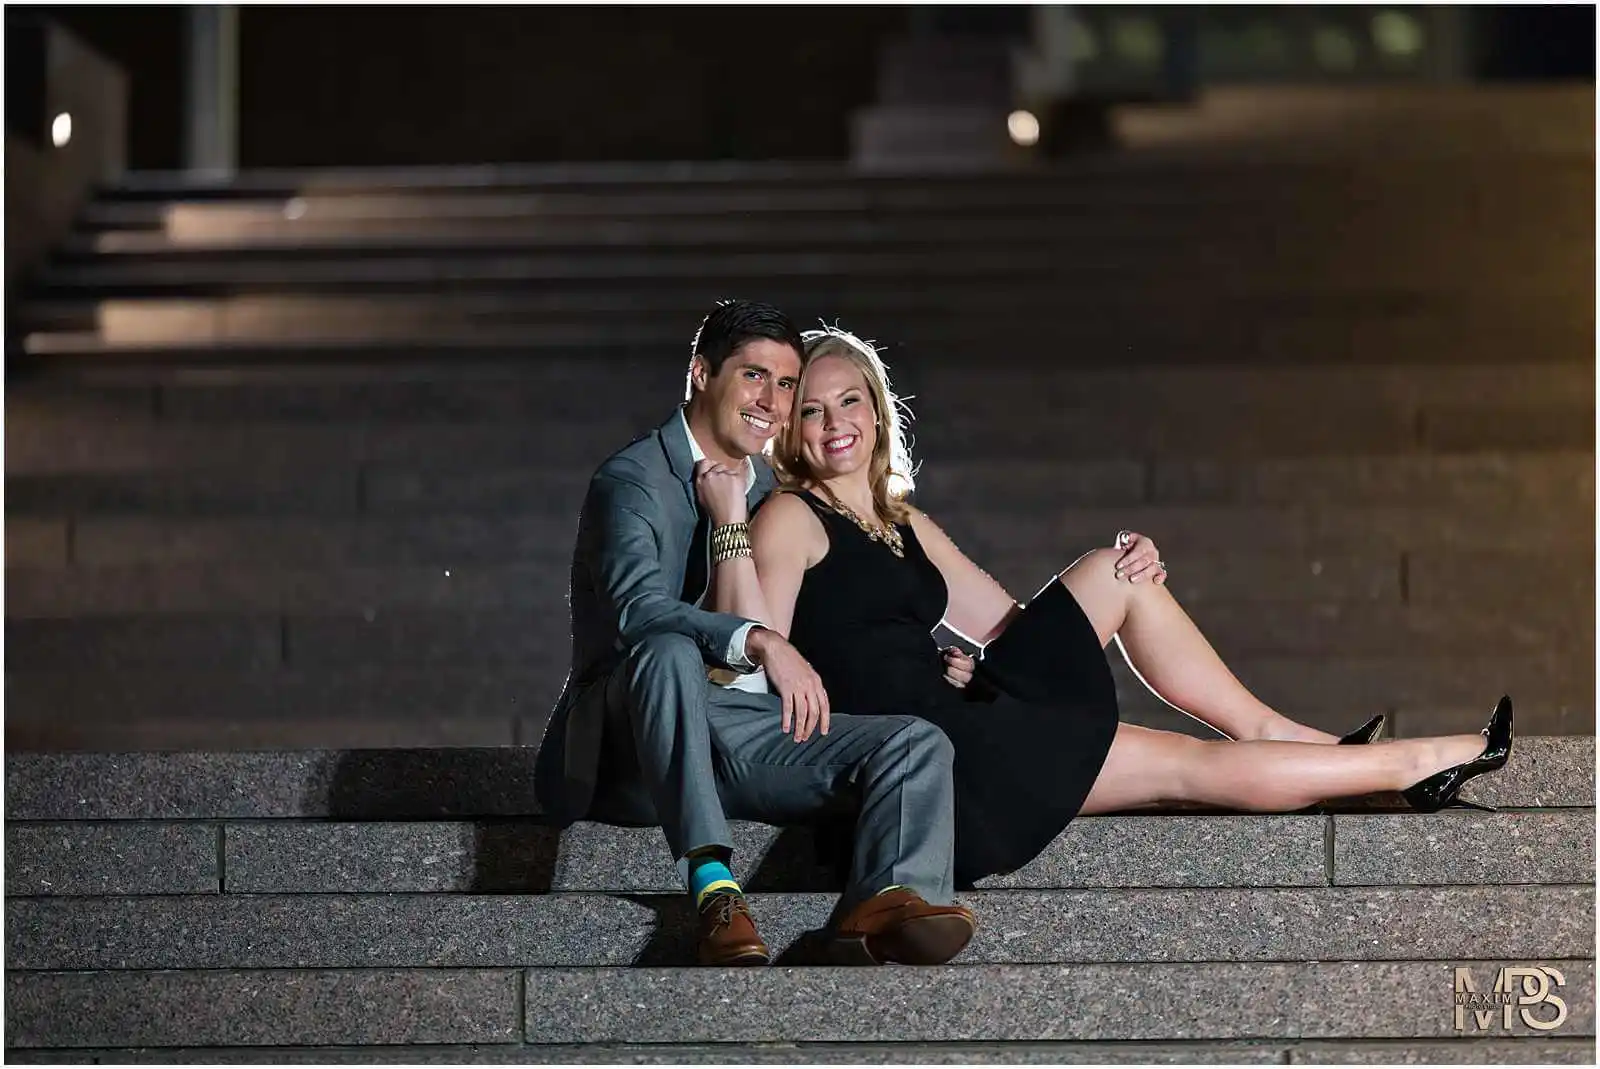 Romantic couple posing on stairs at night.